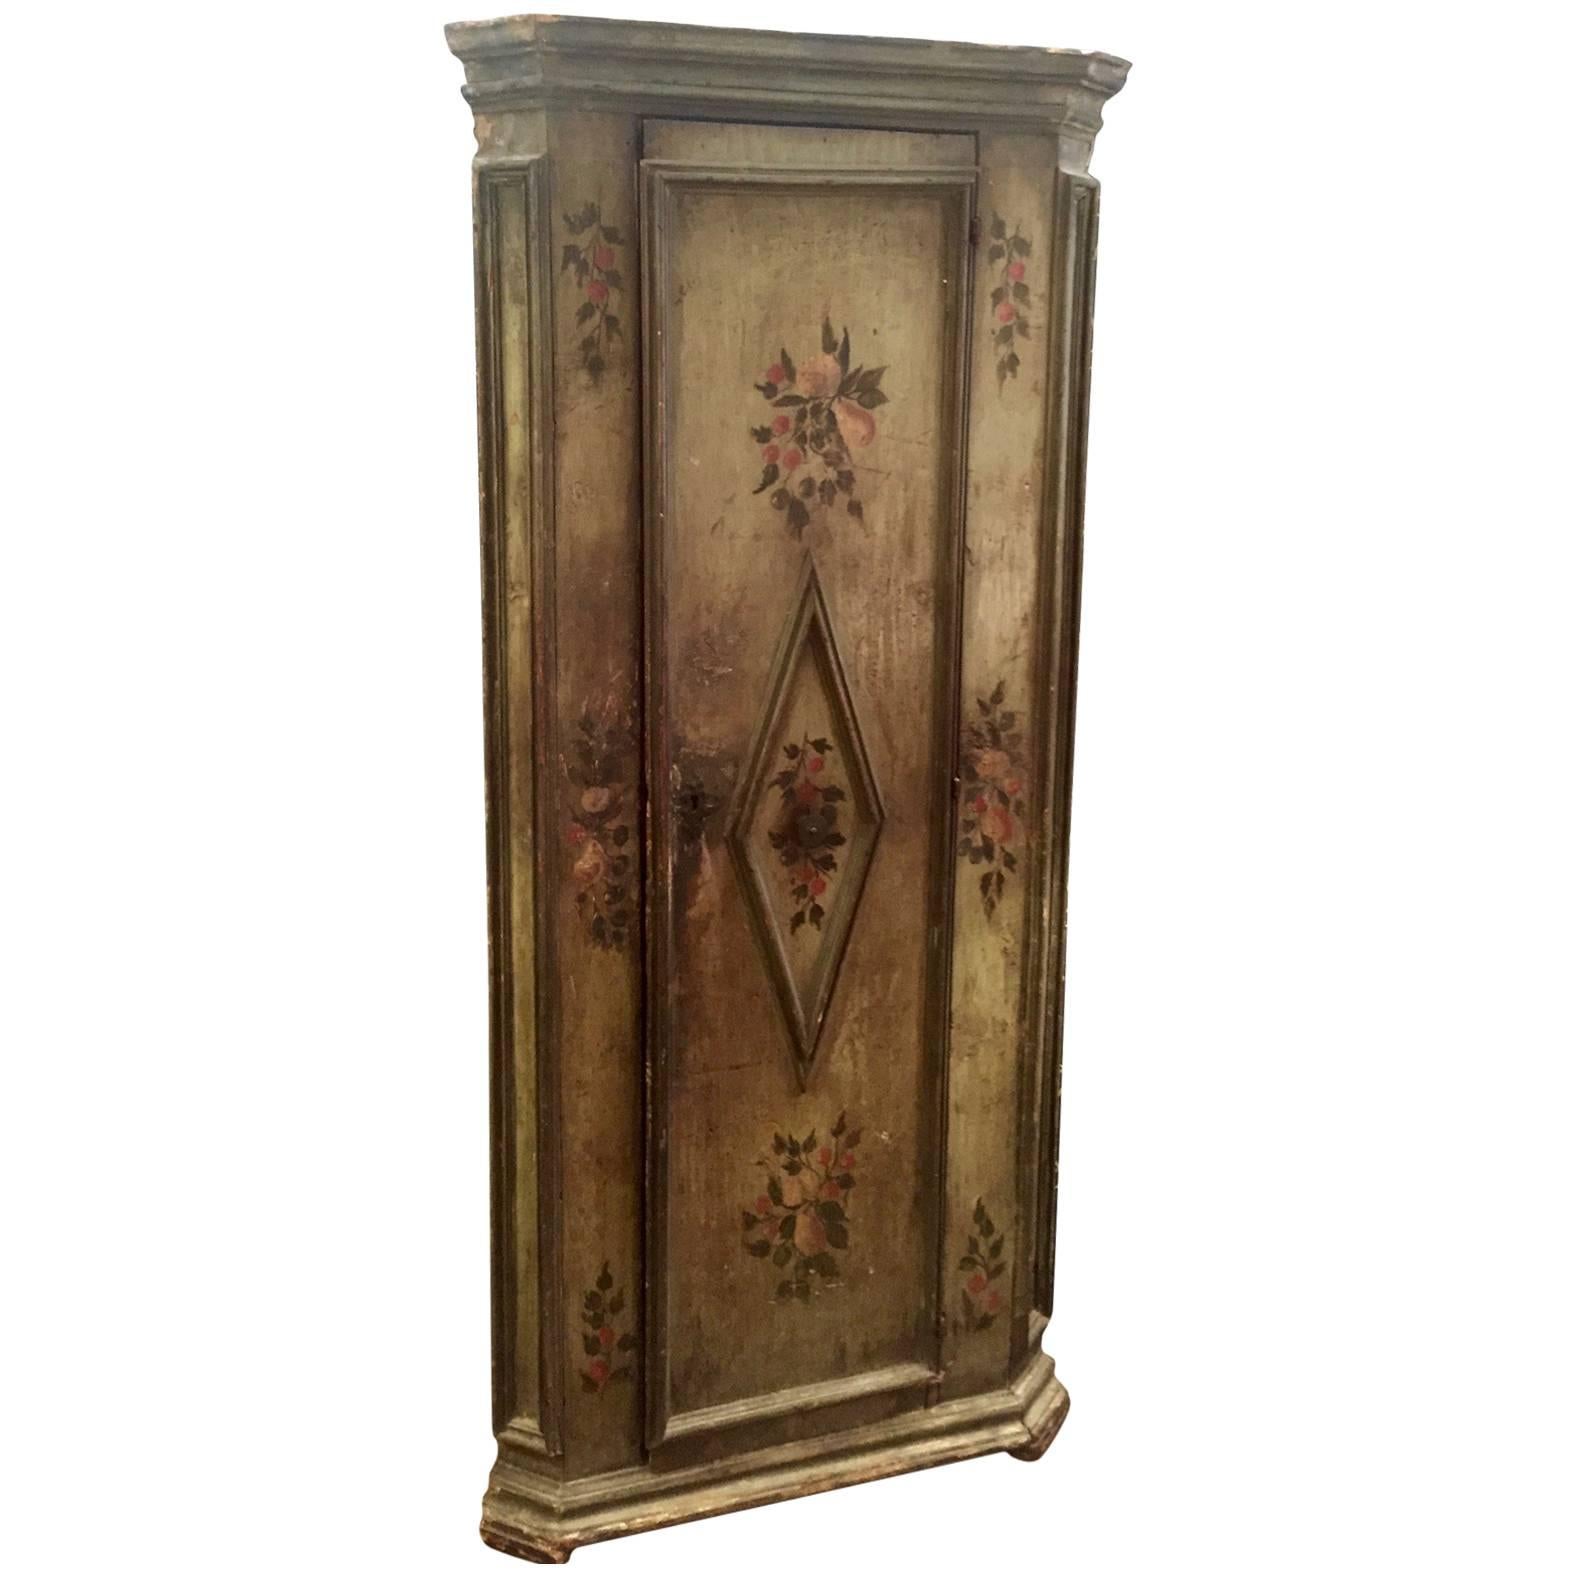 Very Old French Hand-Painted Corner Cupboard